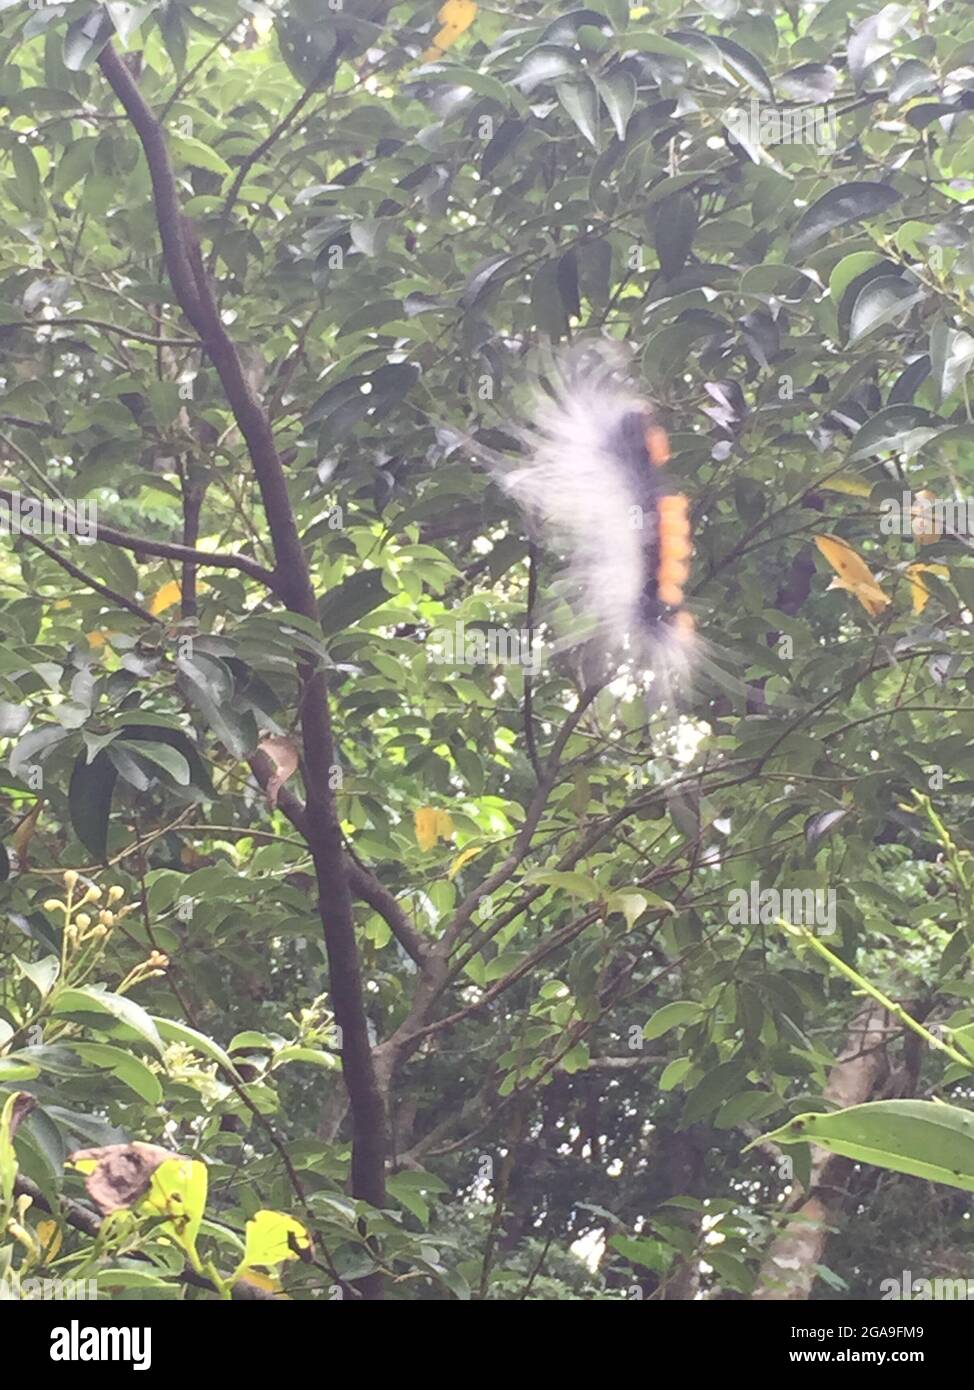 A fuzzy caterpillar in the forest in Taiwan Stock Photo